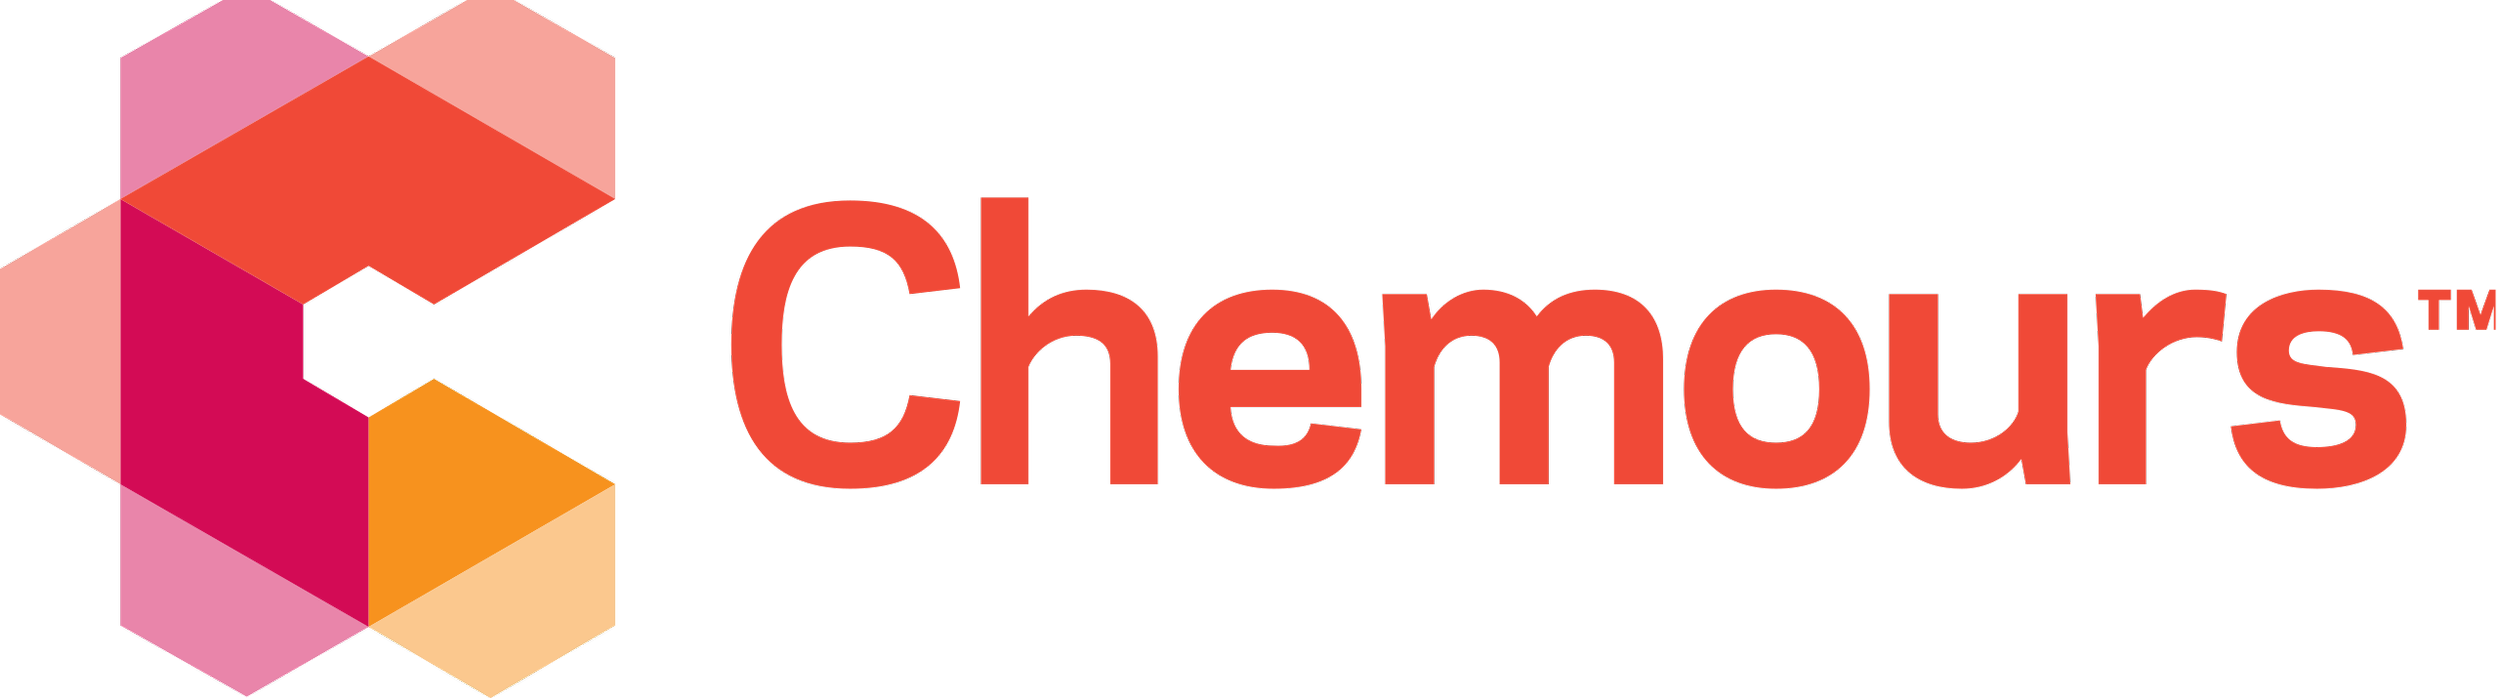 2560px-Chemours.svg.png